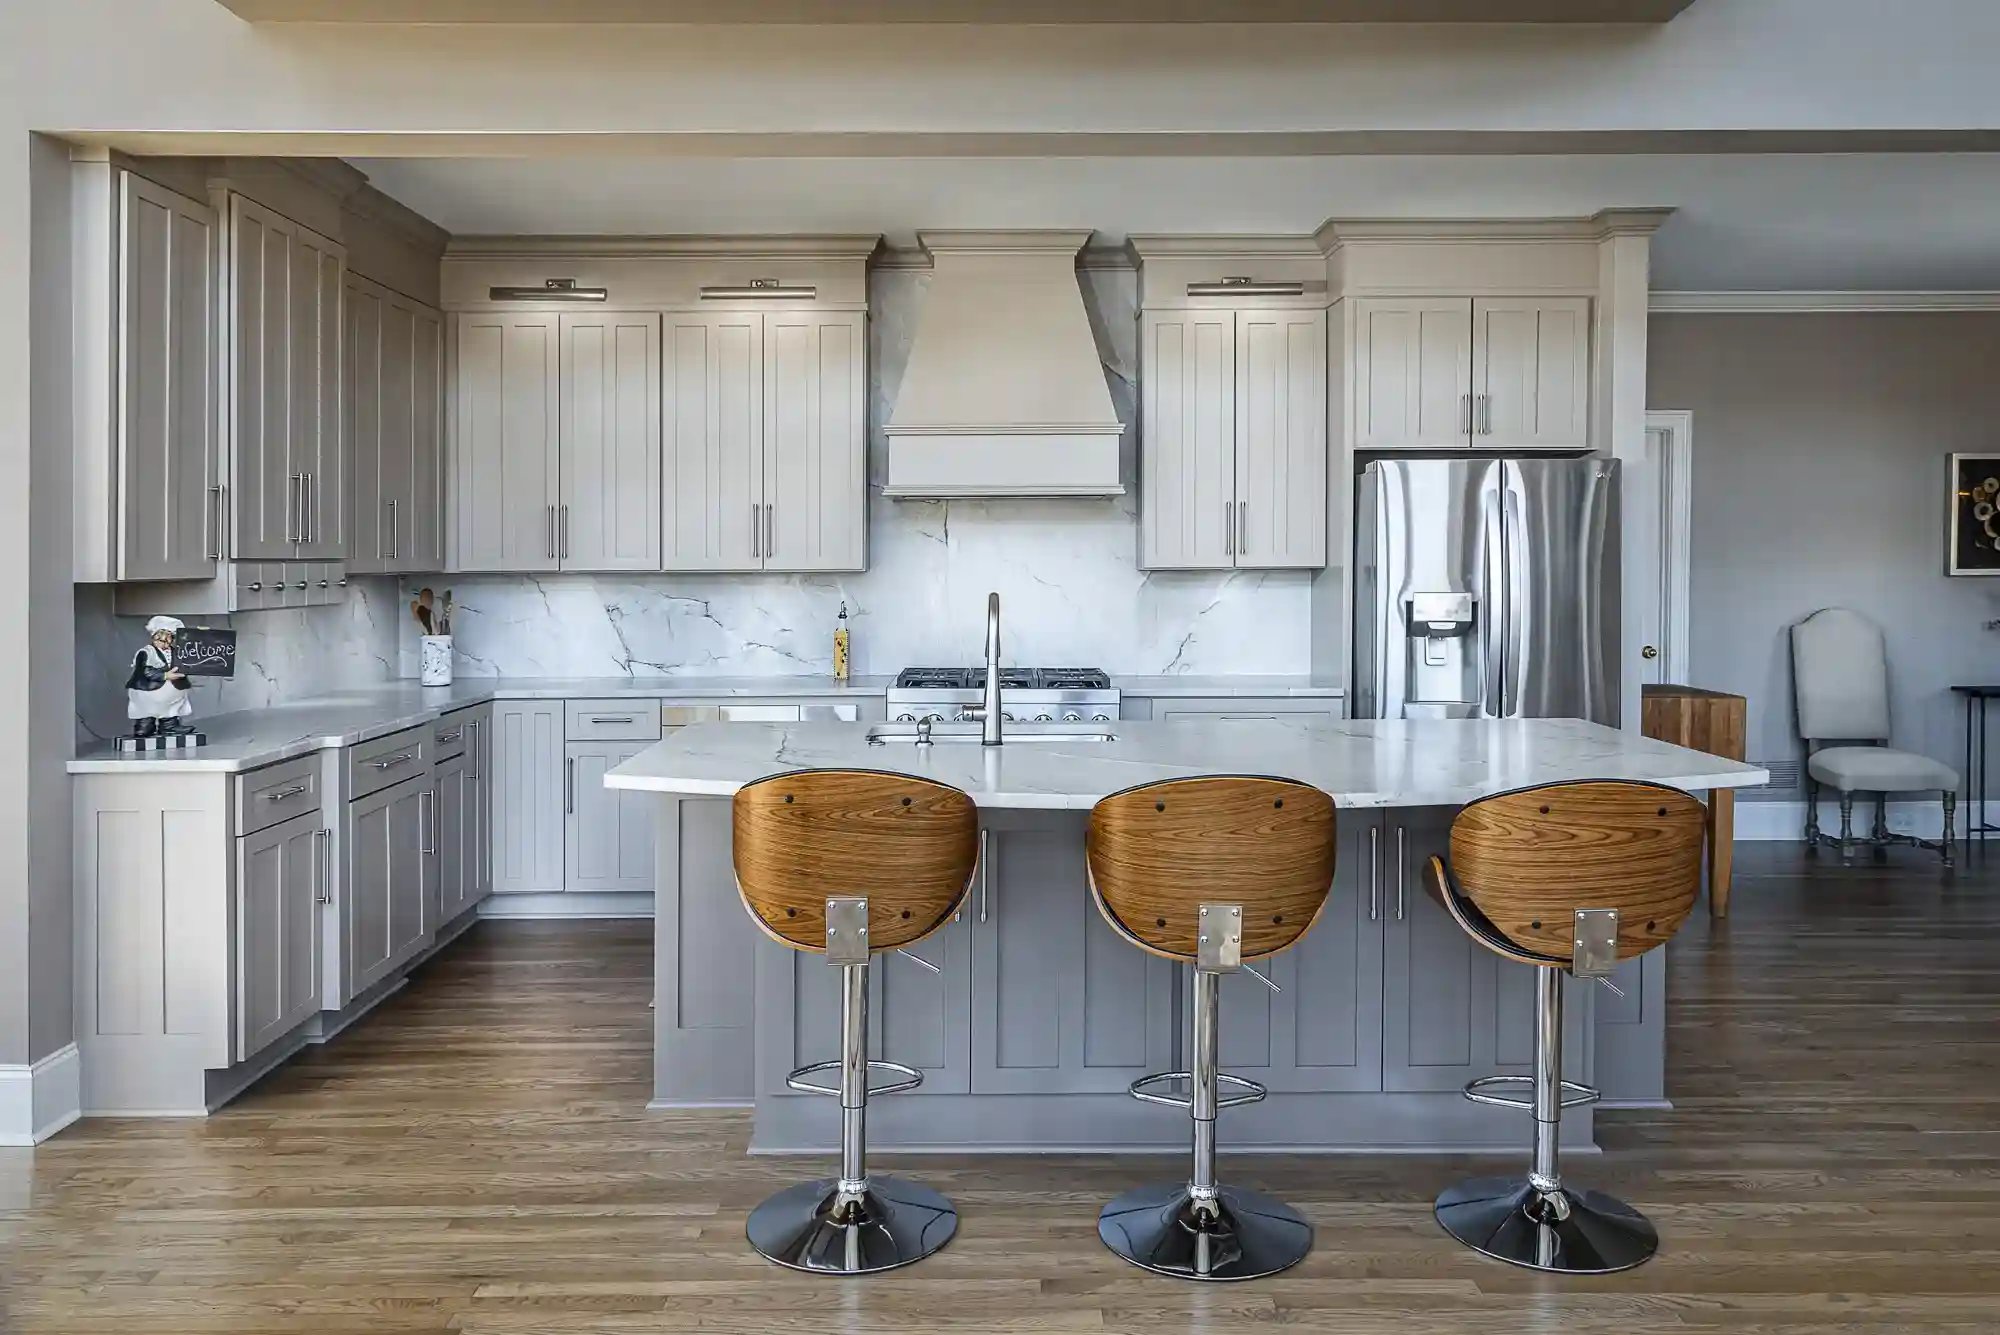 Sleek kitchen with taupe cabinets, marble backsplash, and contemporary wooden bar stools.